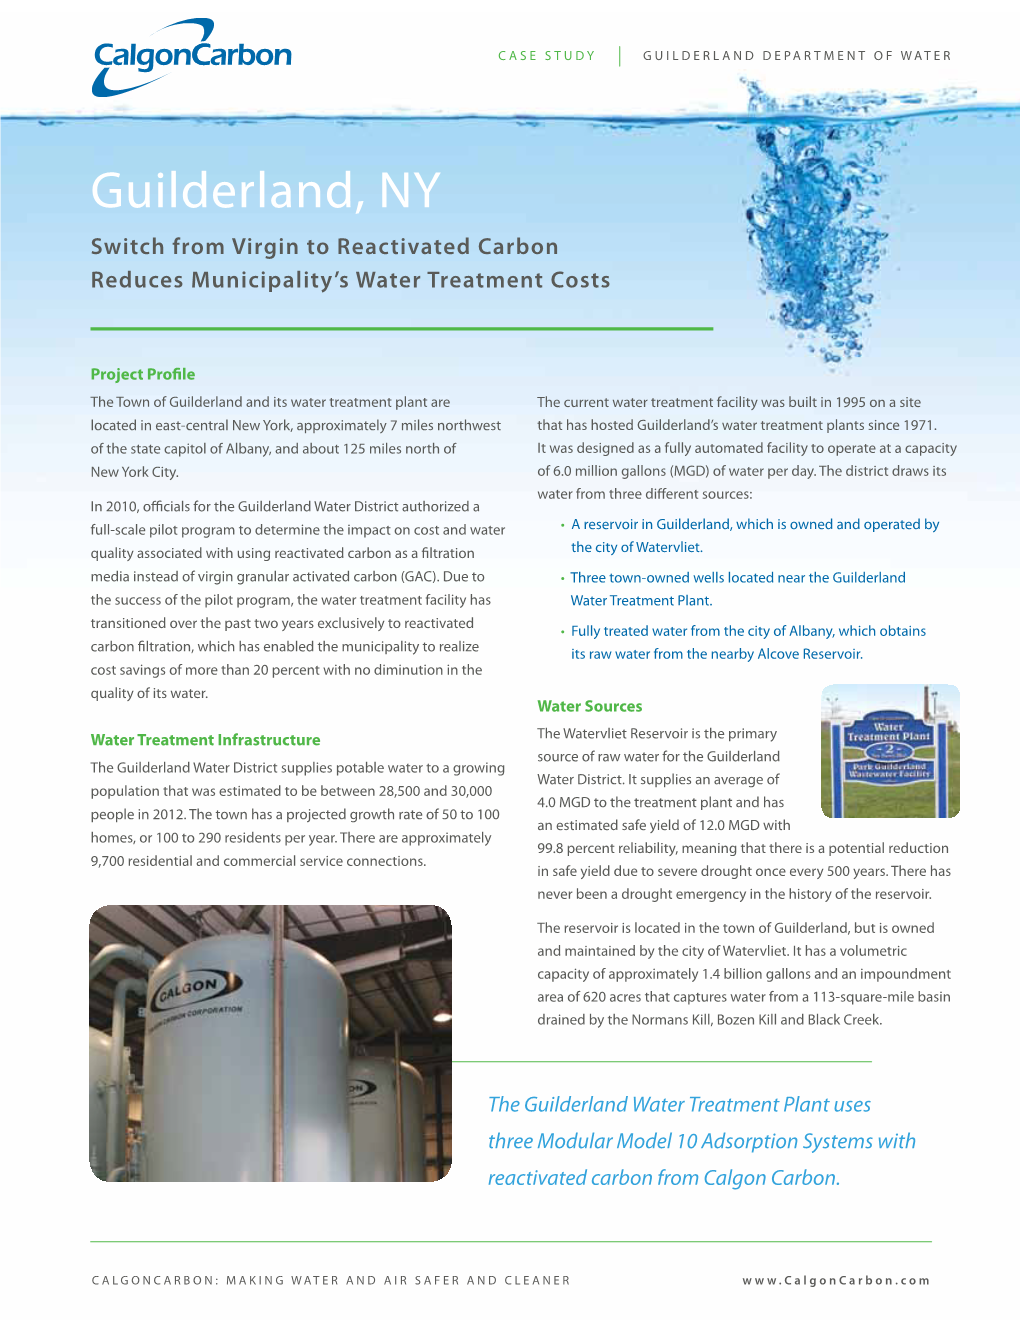 Guilderland, NY Switch from Virgin to Reactivated Carbon Reduces Municipality’S Water Treatment Costs